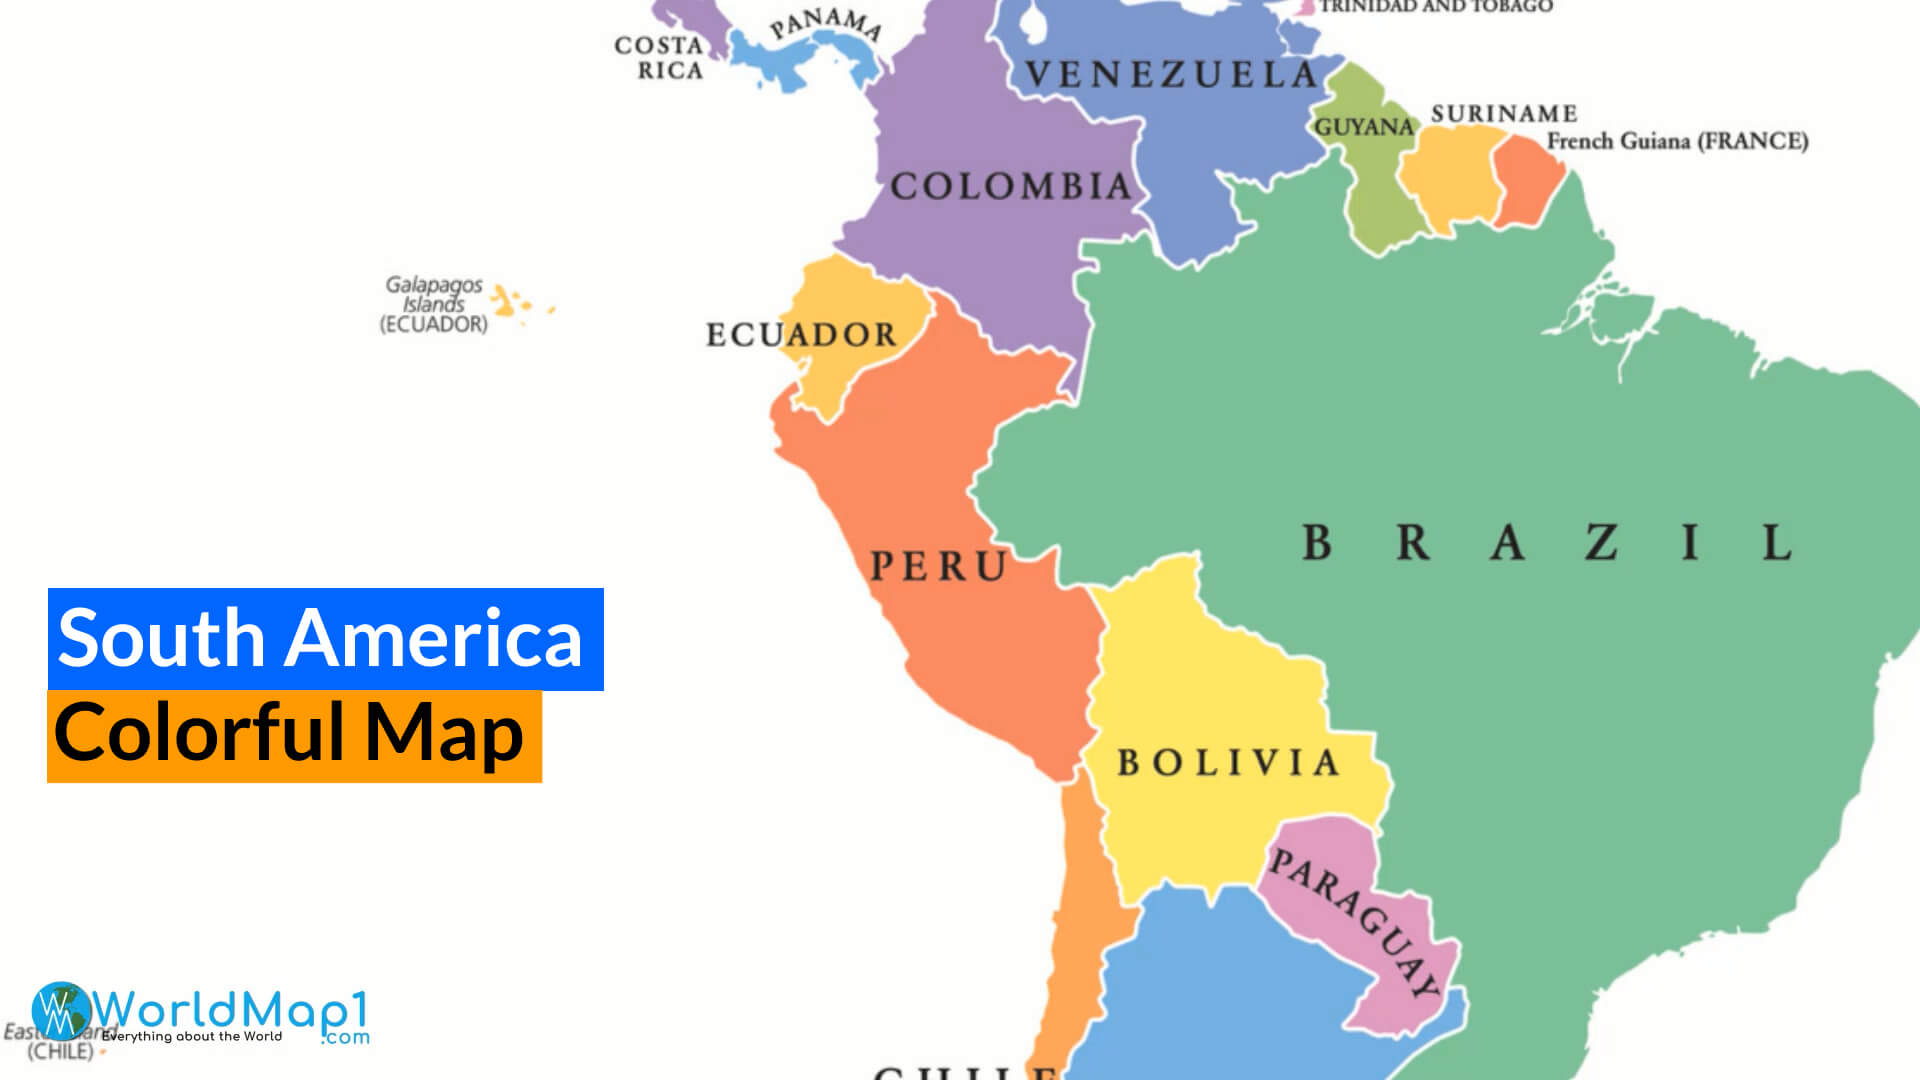 Colorful Map of South America